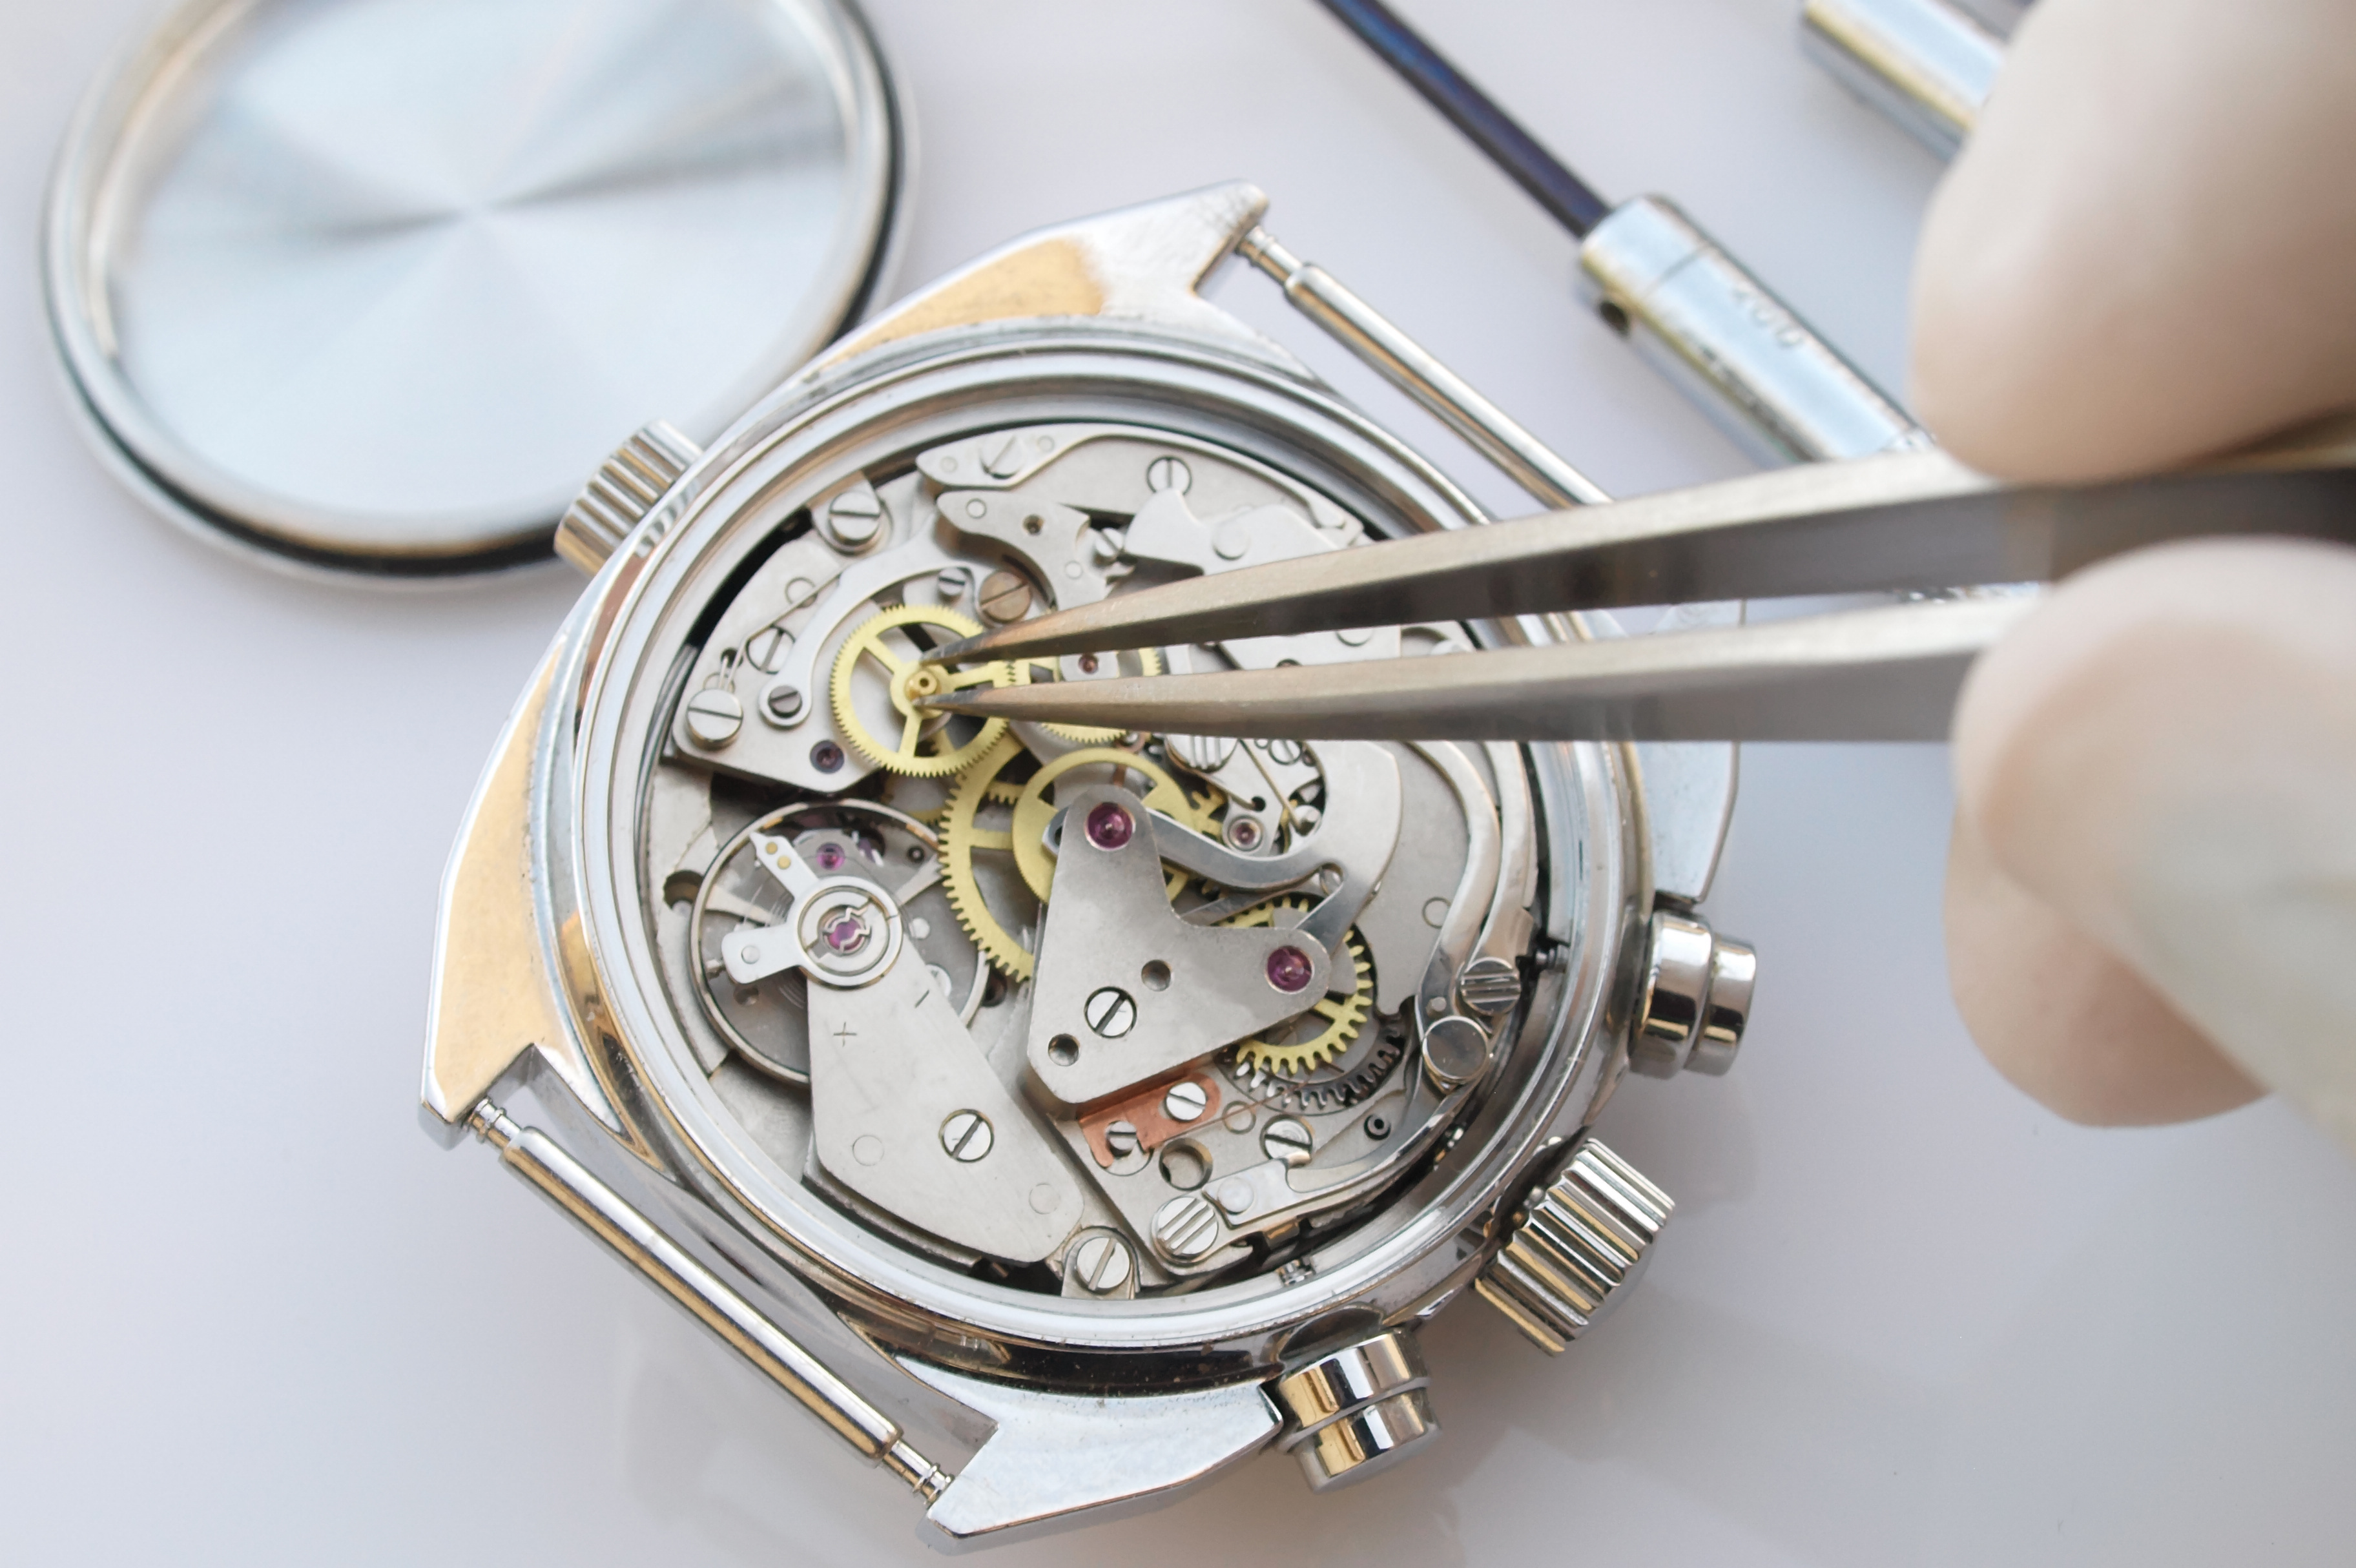 watch repairs and services in Naples FL